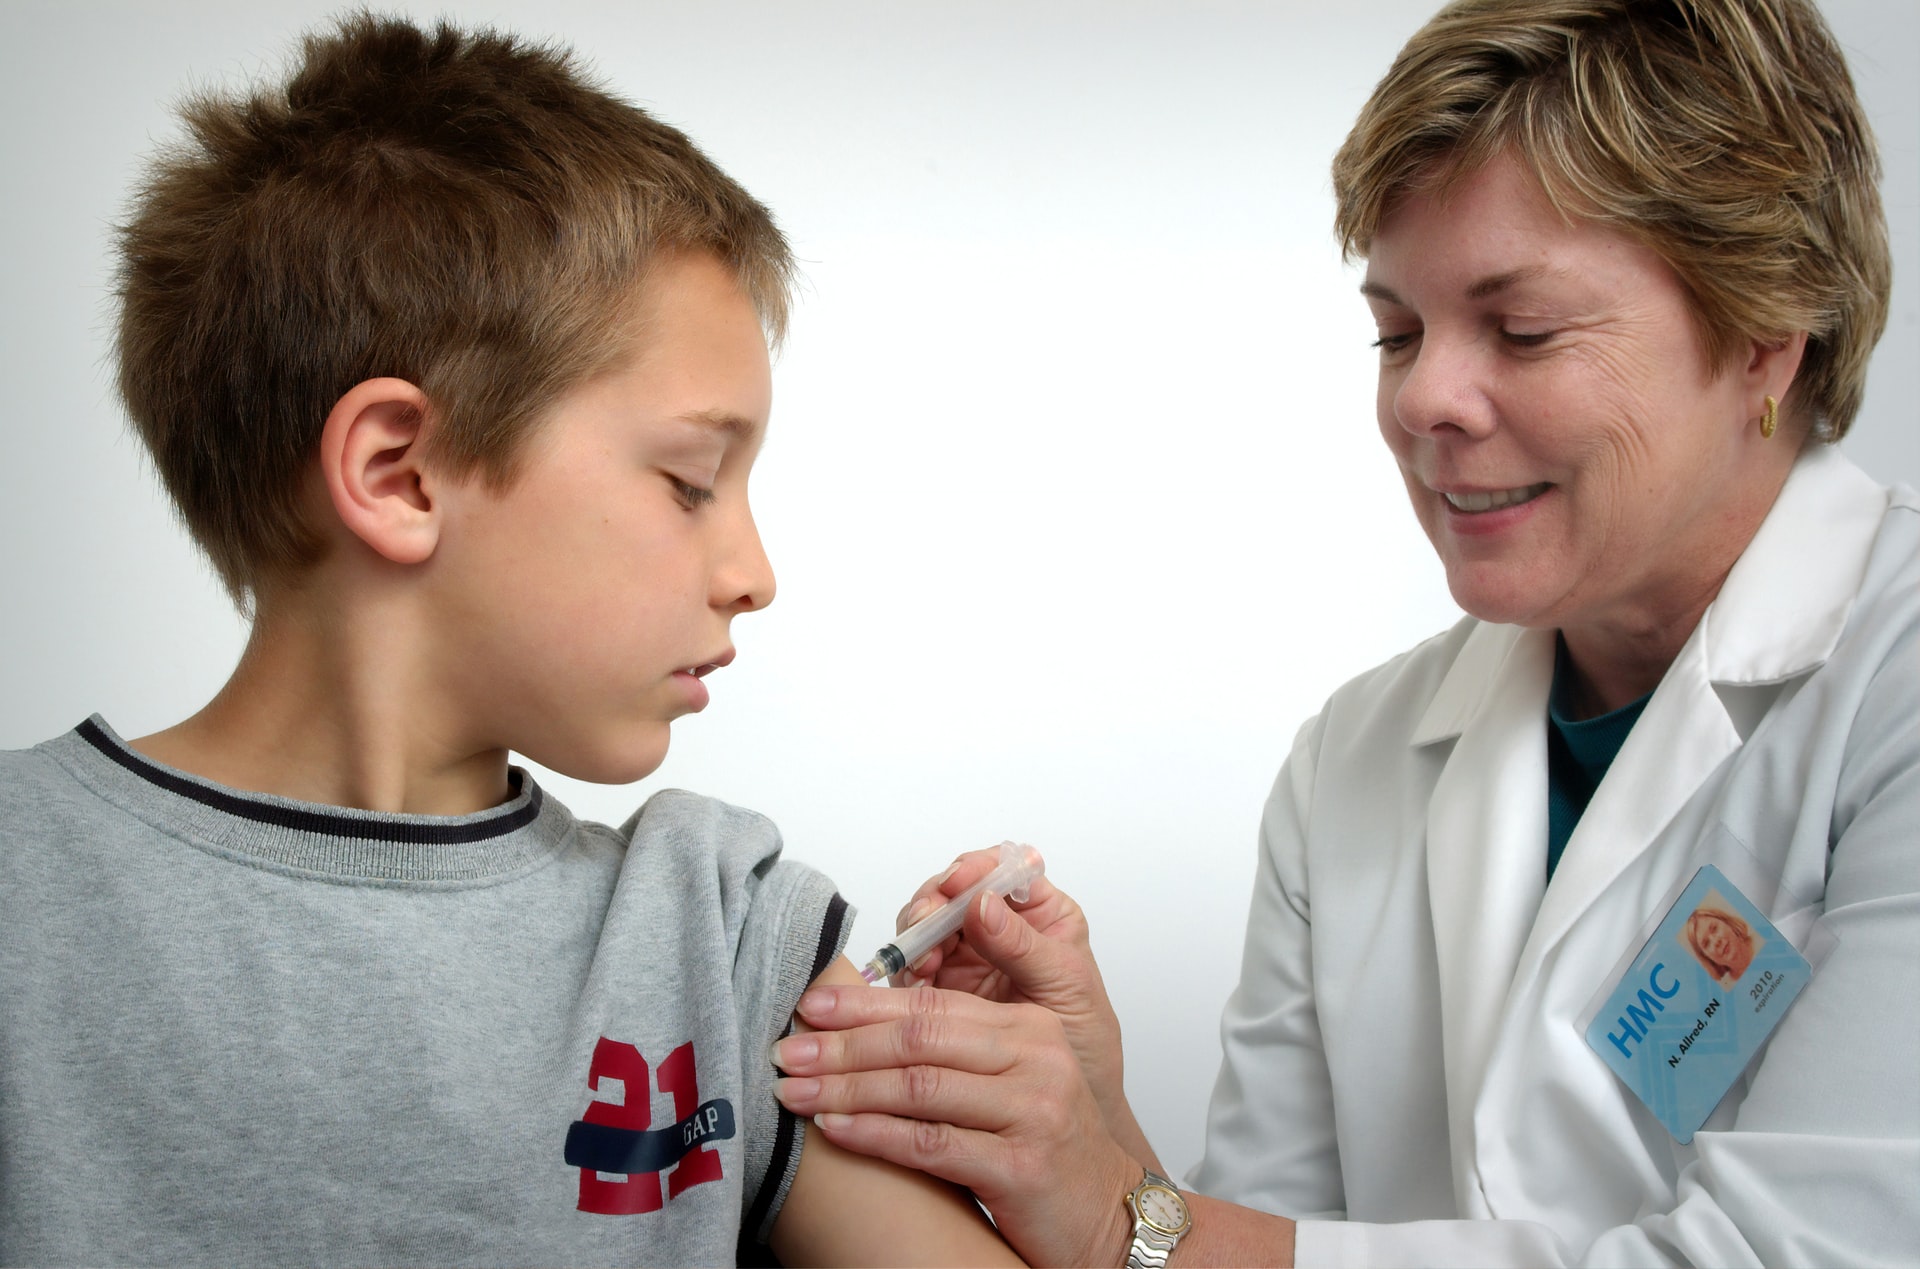 Covid-19 vaccine provisionally approved for children – Expert Reaction